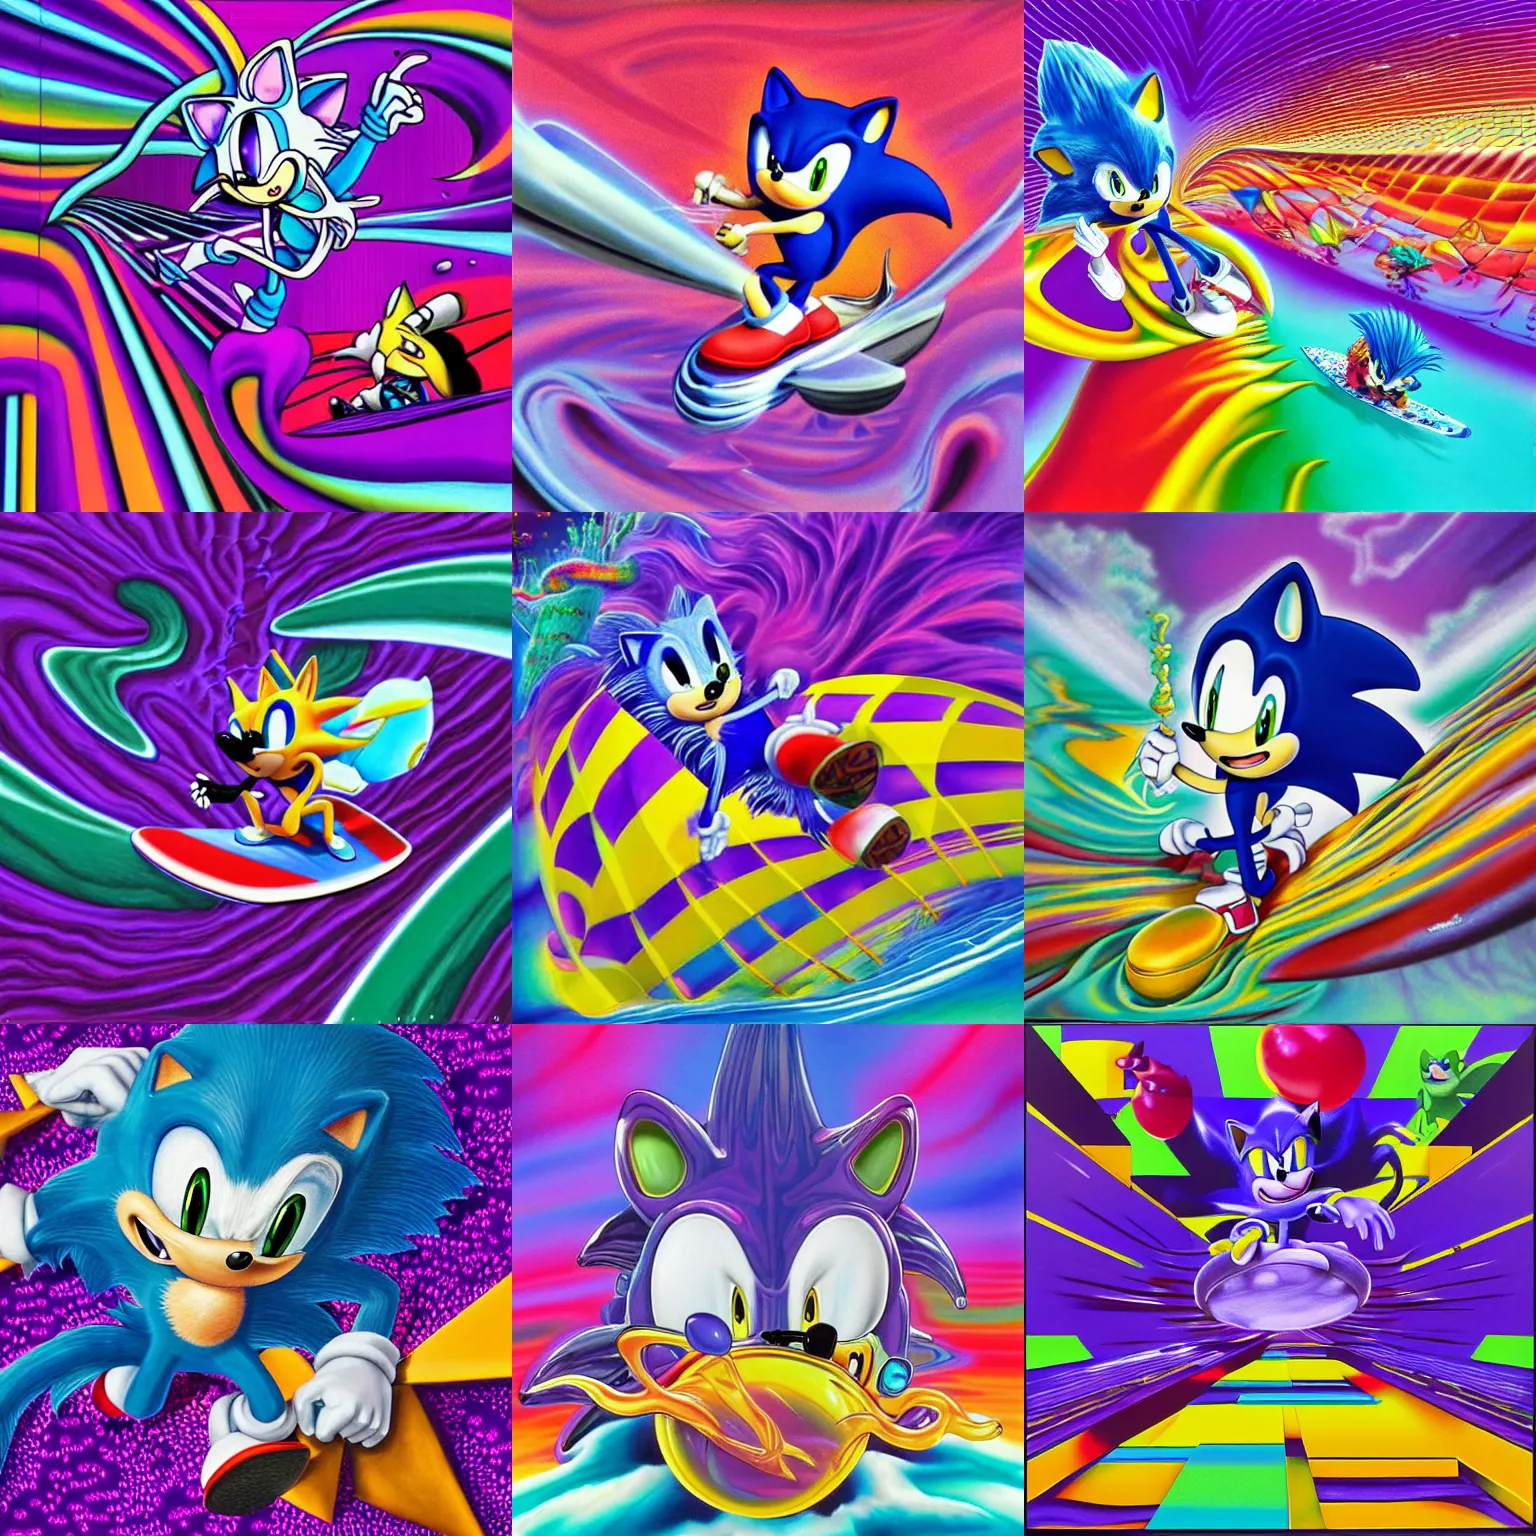 Prompt: surreal, sharp, detailed professional, soft pastels, high quality airbrush art mgmt album cover of a liquid dissolving airbrush art lsd dmt sonic the hedgehog surfing through cyberspace, purple checkerboard background, 1 9 9 0 s 1 9 9 2 sega genesis video game album cover